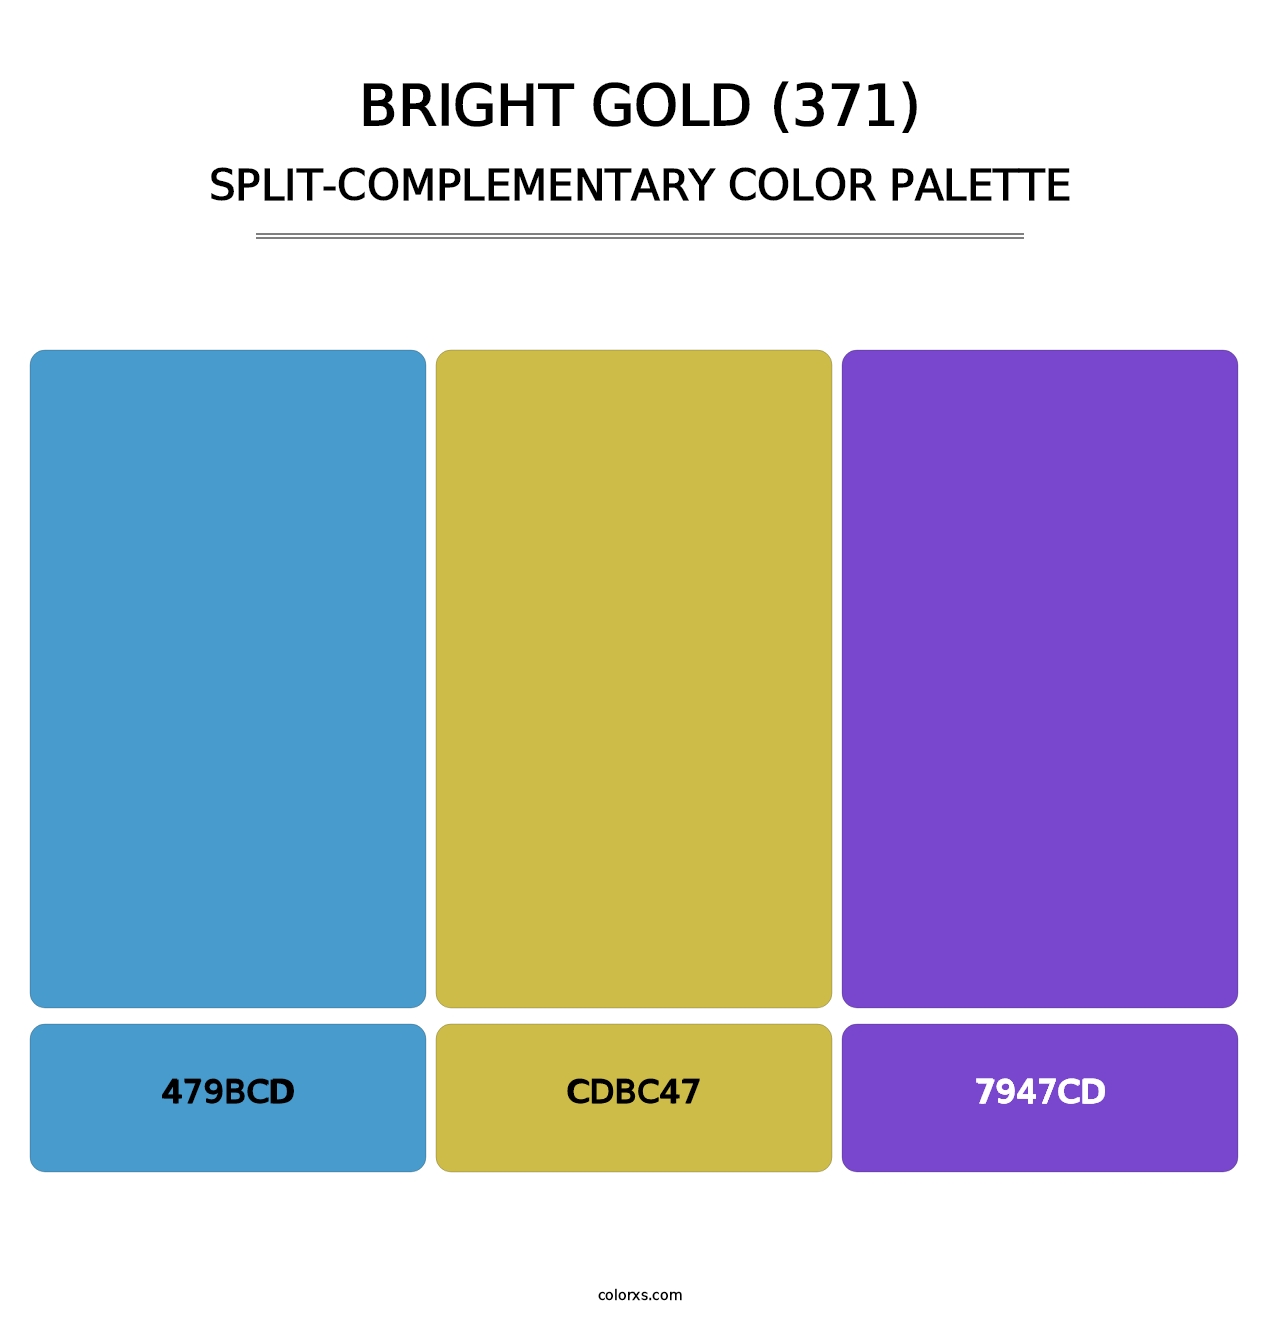 Bright Gold (371) - Split-Complementary Color Palette